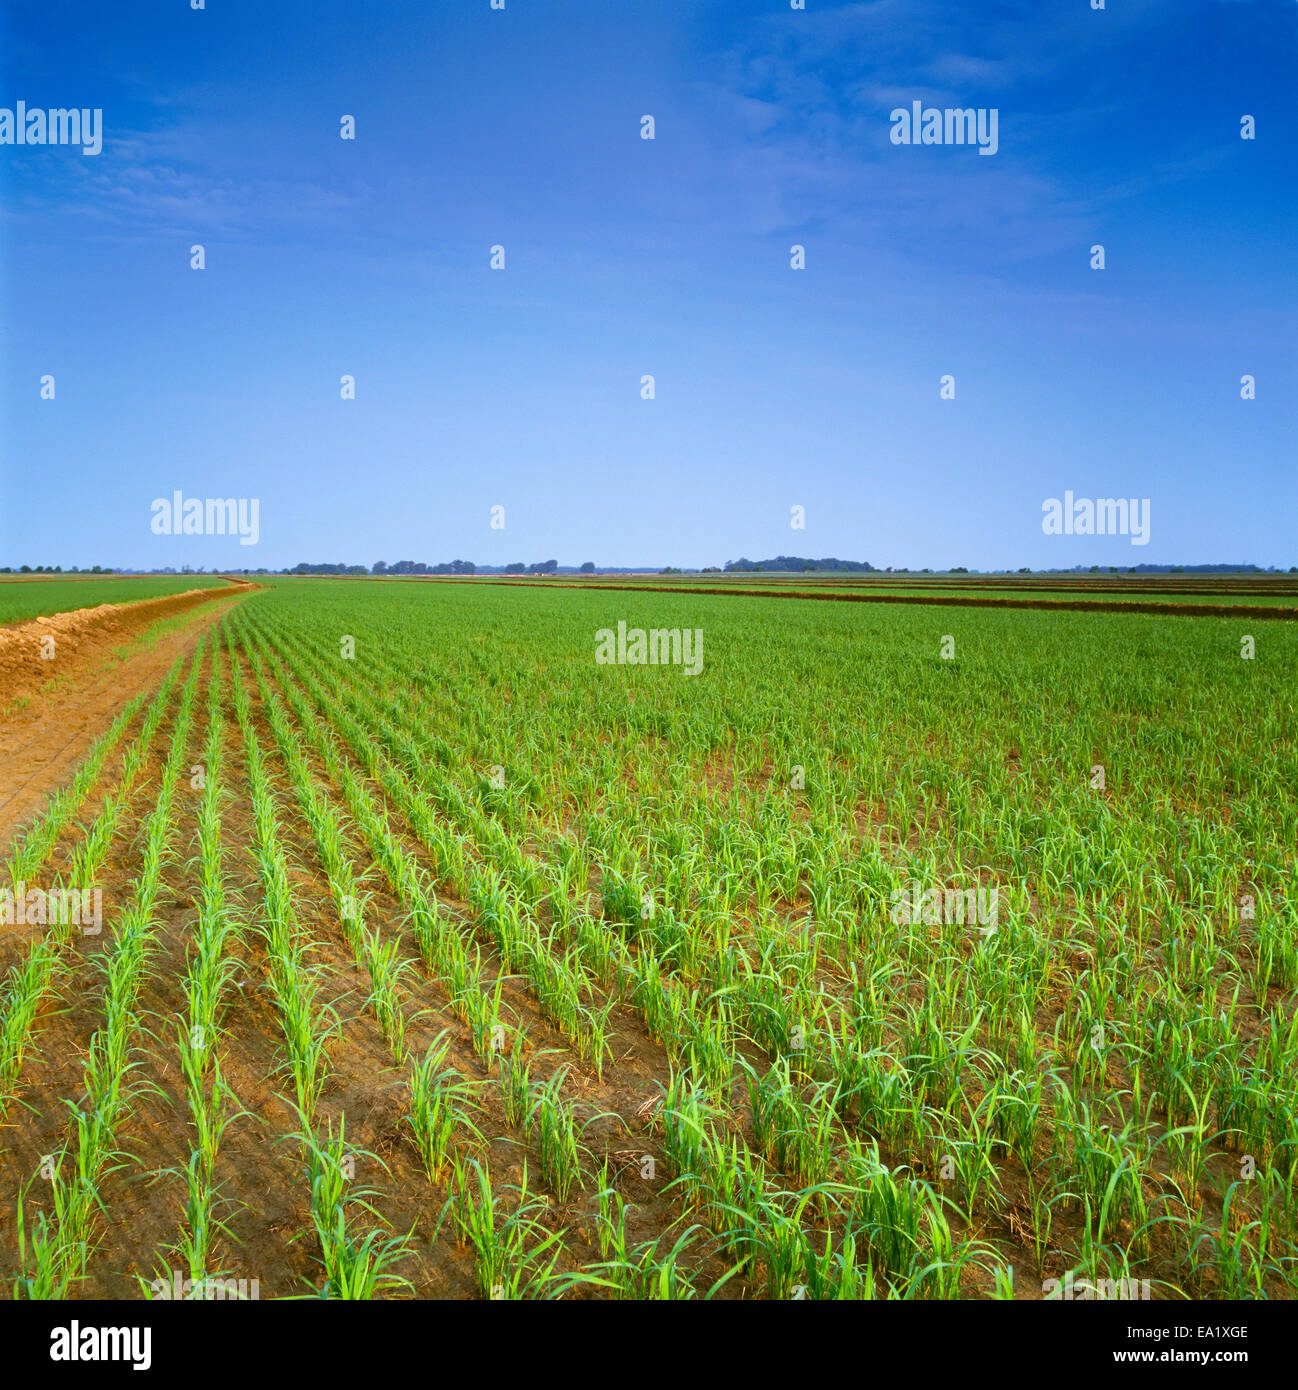 Agriculture - A large field of early growth rice plants prior to flooding / Arkansas, USA. Stock Photo